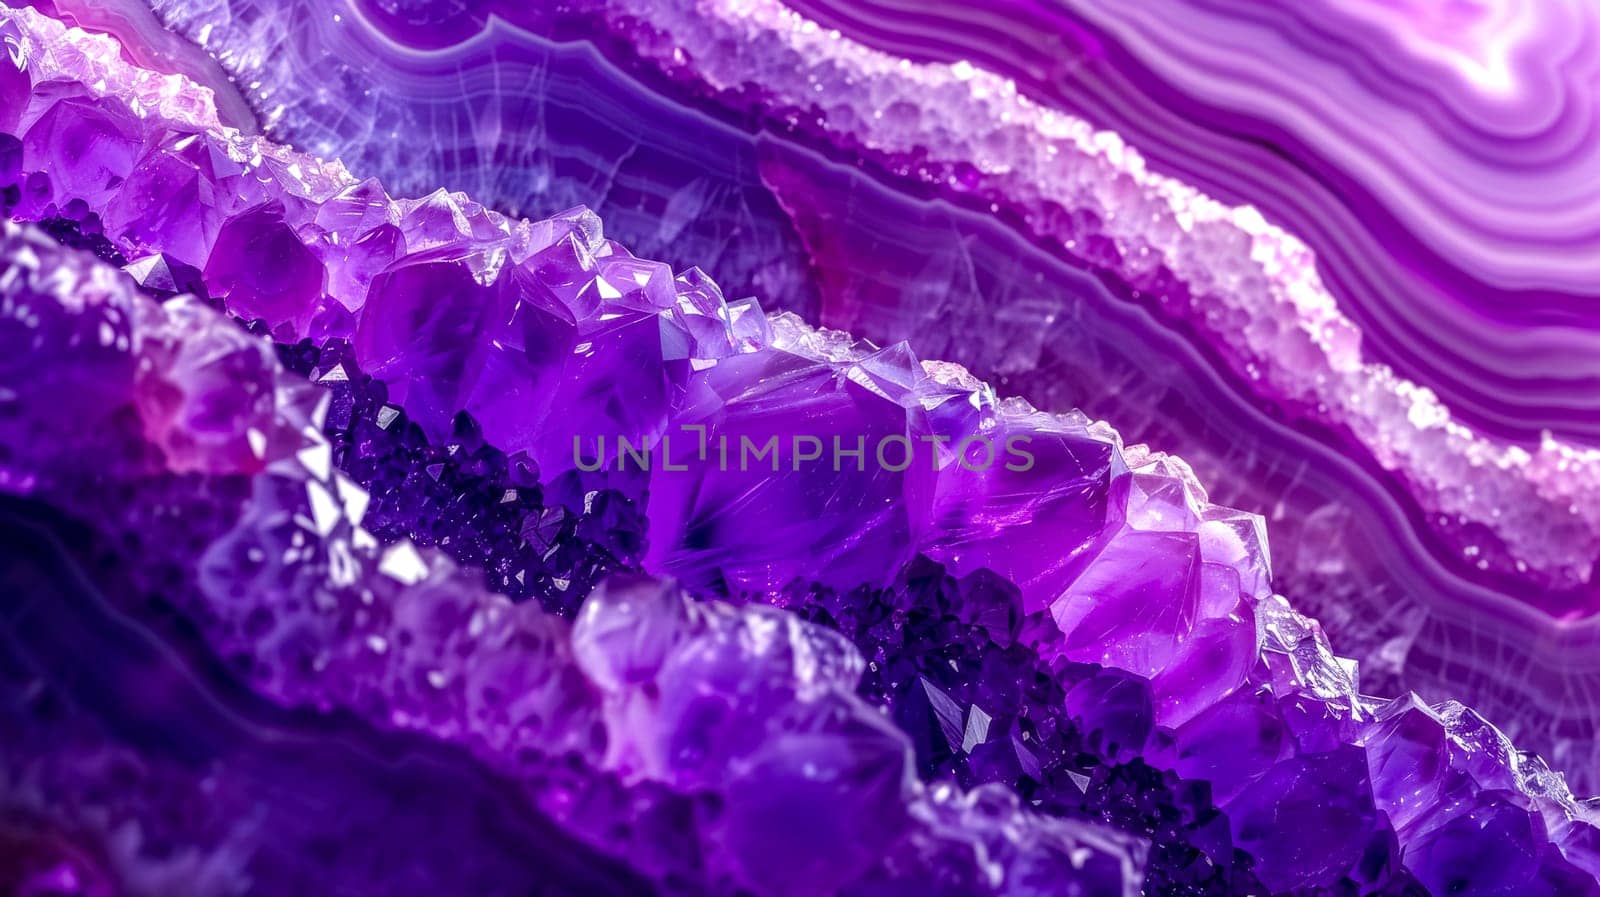 Close-up of a stunning amethyst crystal with vibrant purple hues by Edophoto